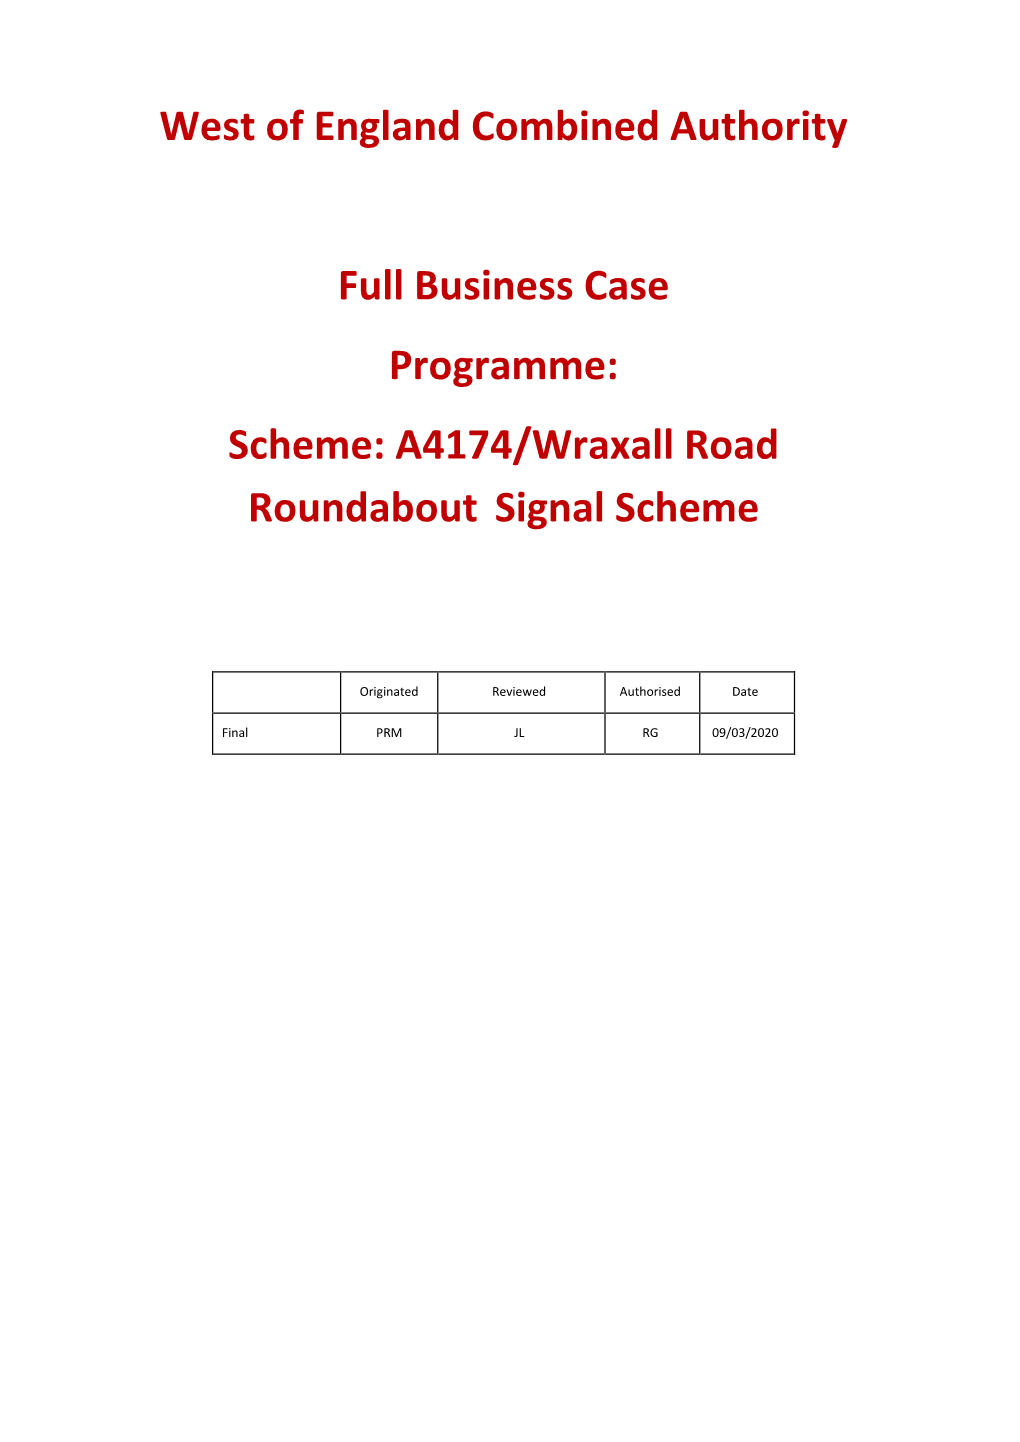 West of England Combined Authority Full Business Case Programme